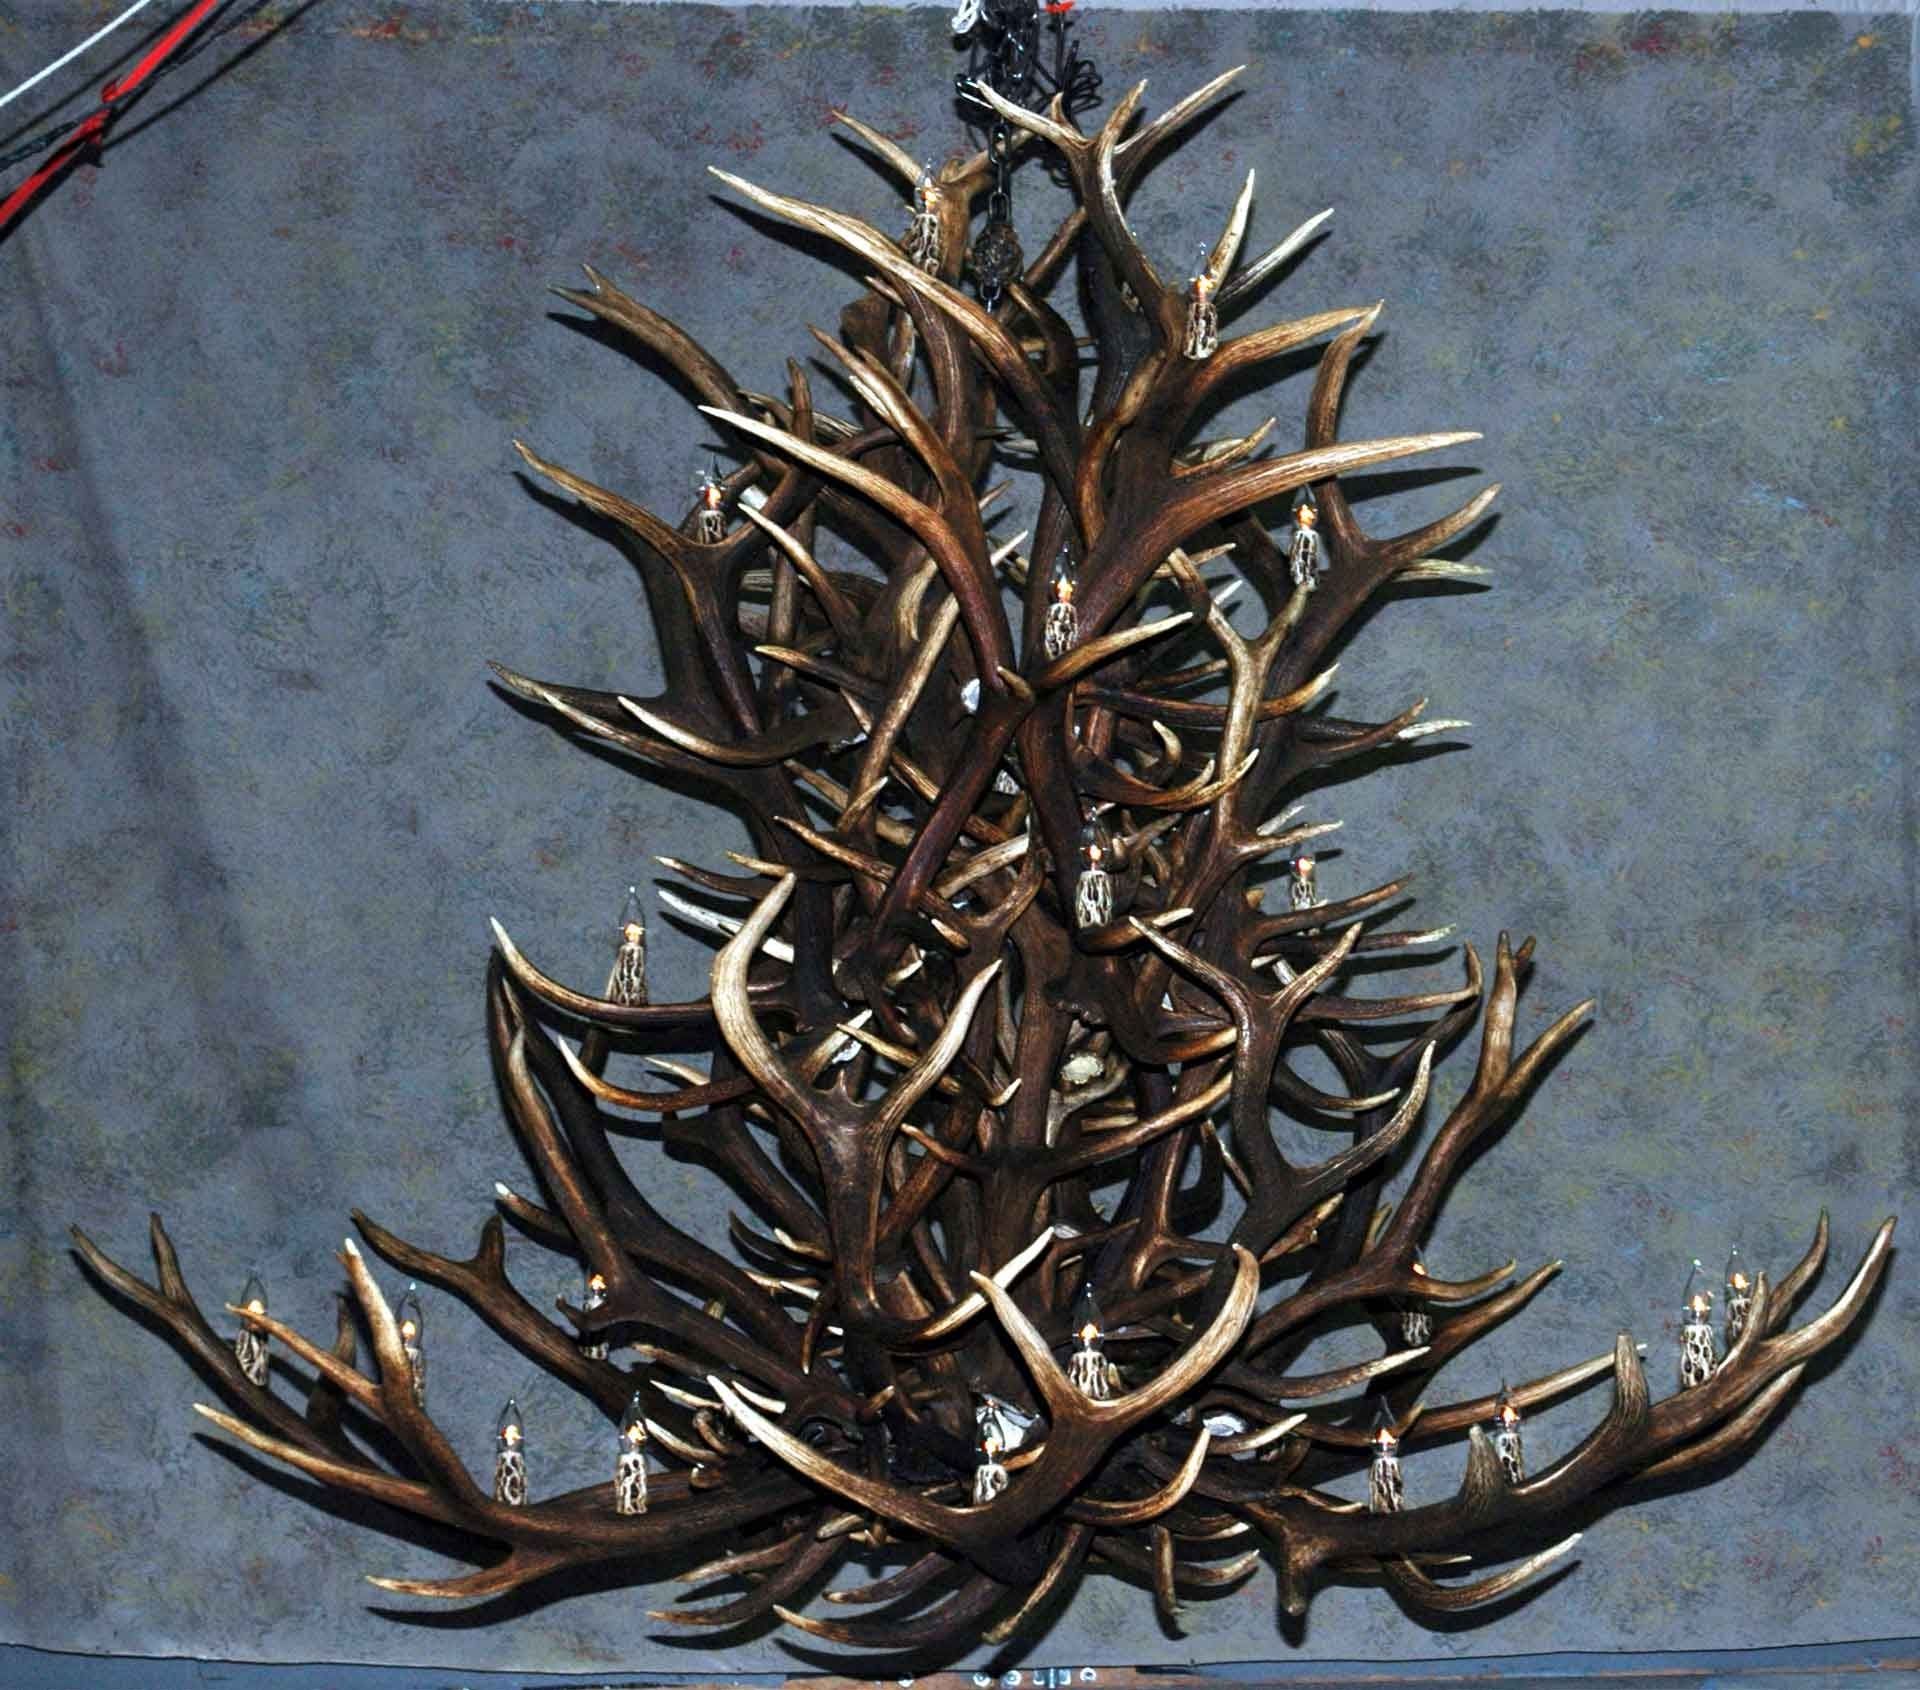 Large Antler Chandelier For Best And Newest Antler Chandeliers, Deer Antler Chandelier, Deer Antler Lamps (View 4 of 20)